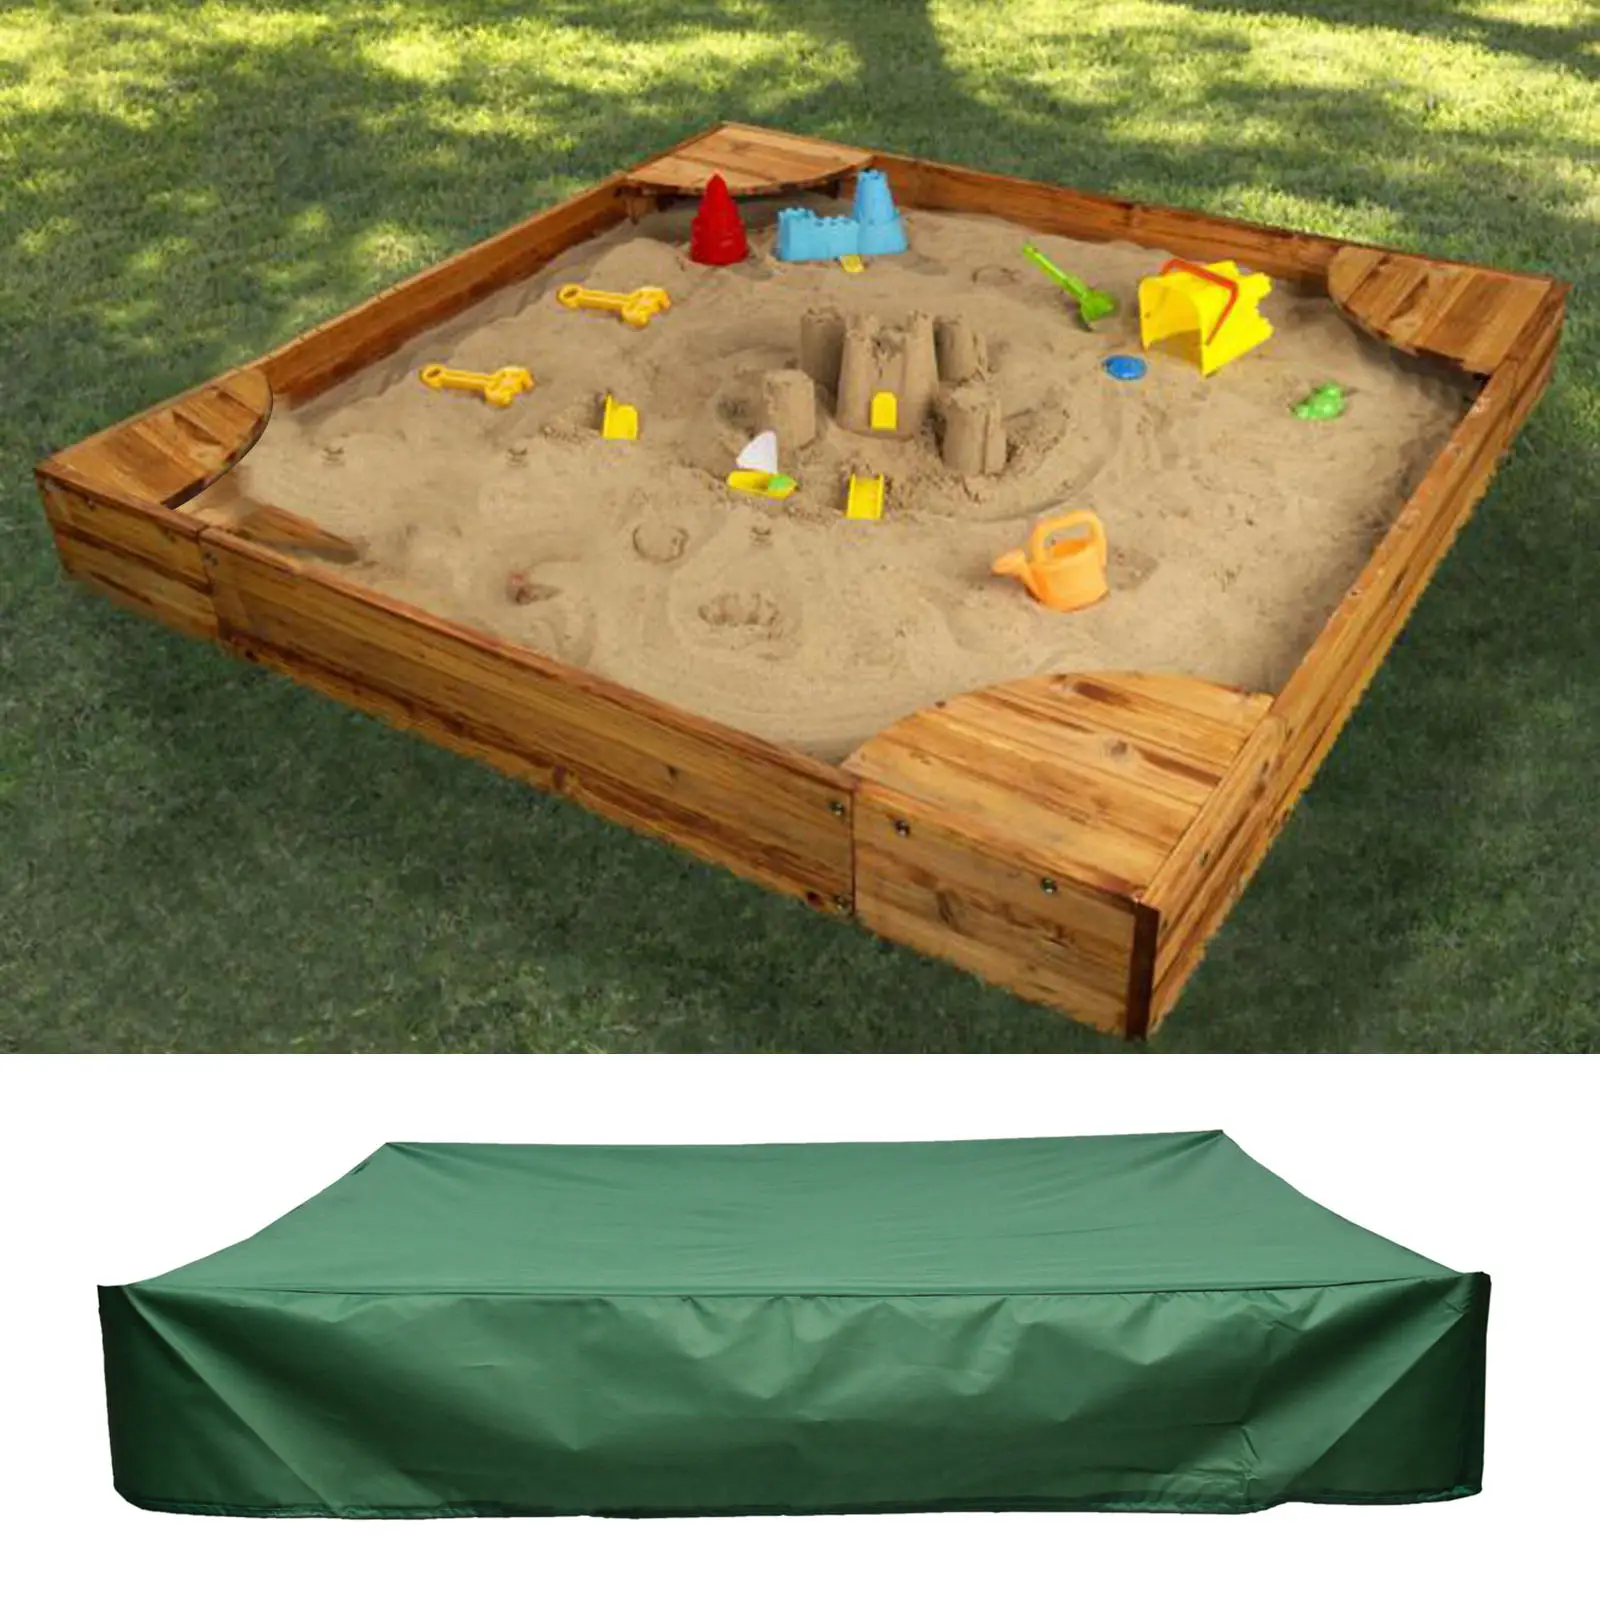 Sandboxes Dustproof Cover Sand Box Waterproof Bunker Cover for Protects Sand and Toys Sandpit Pool Protective Cover Sandboxes Cover 